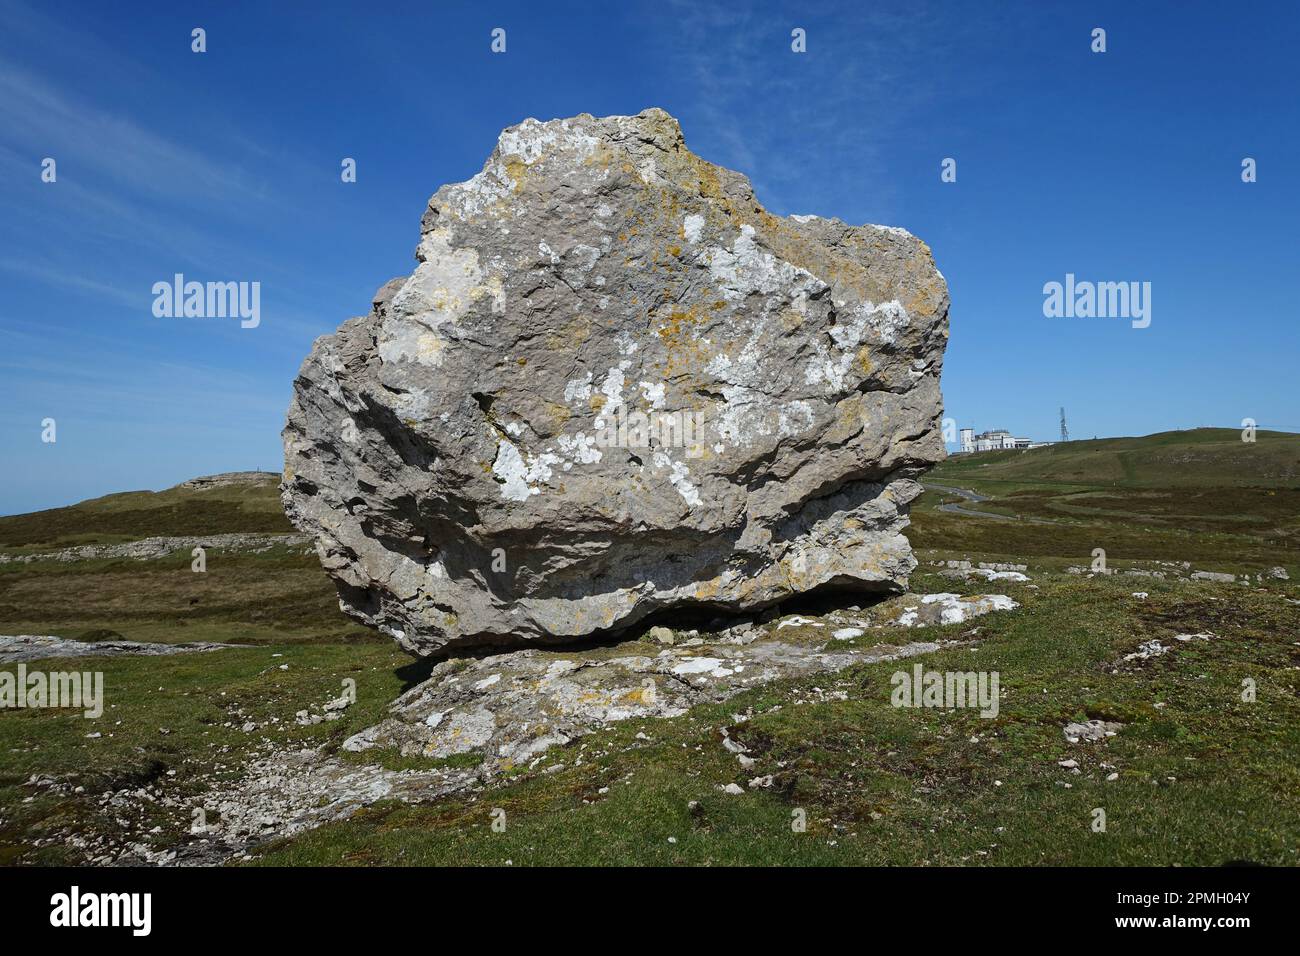 Glacial erratic on The Great Orme, a limestone hill at Llandudno,Wales, UK Stock Photo